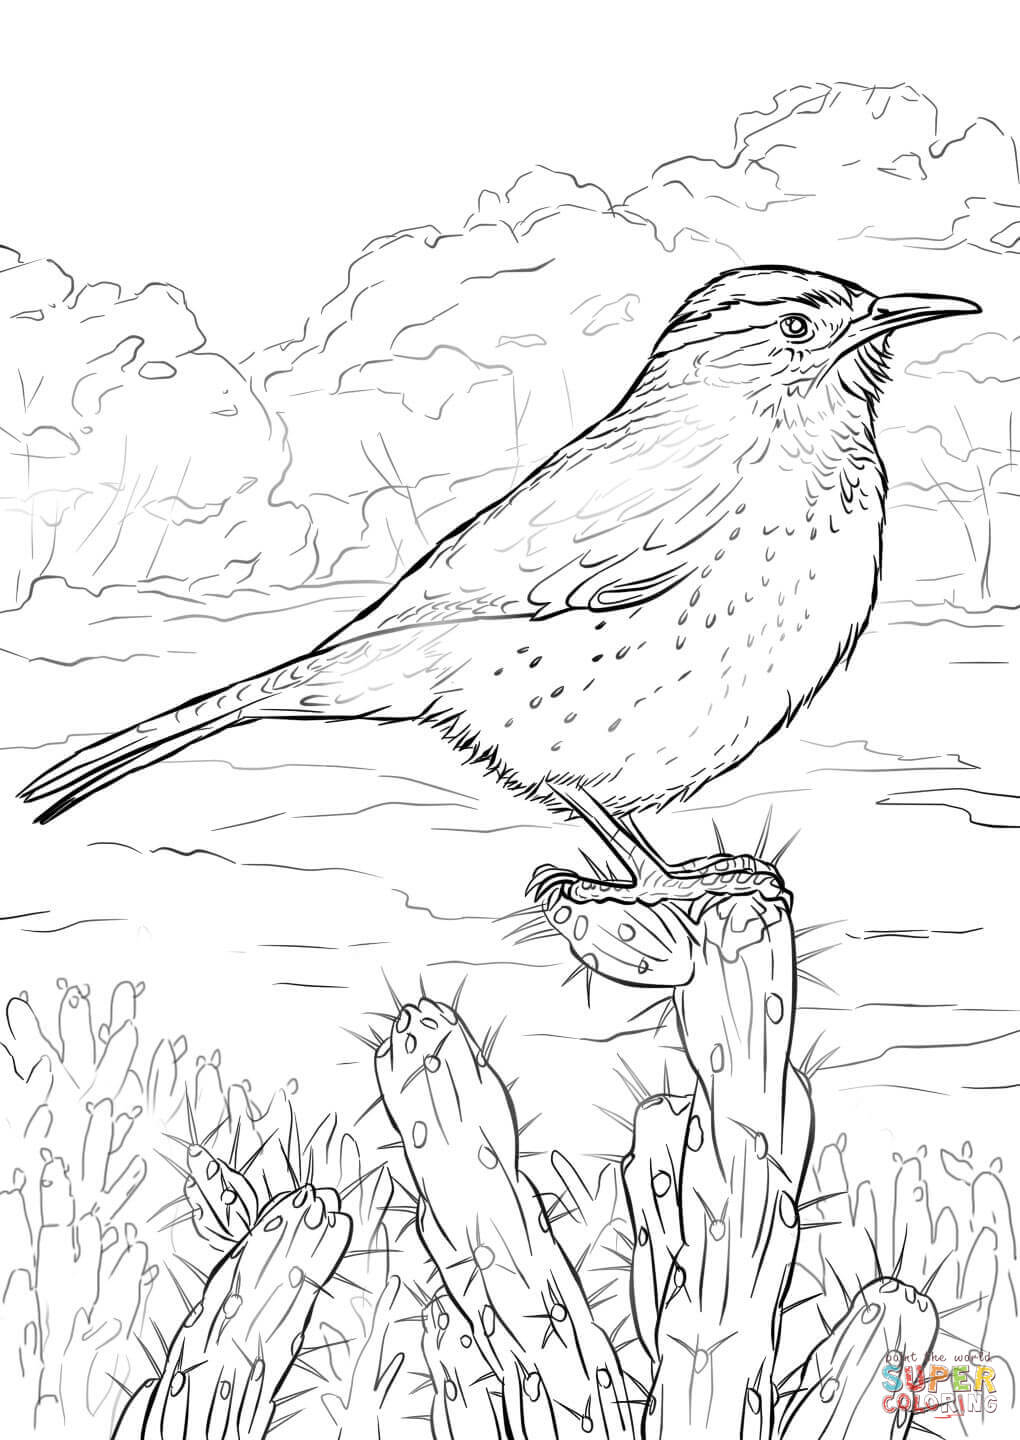 Carolina Wren Coloring Page Cactus Wren Coloring Page Free Printable Coloring Pages